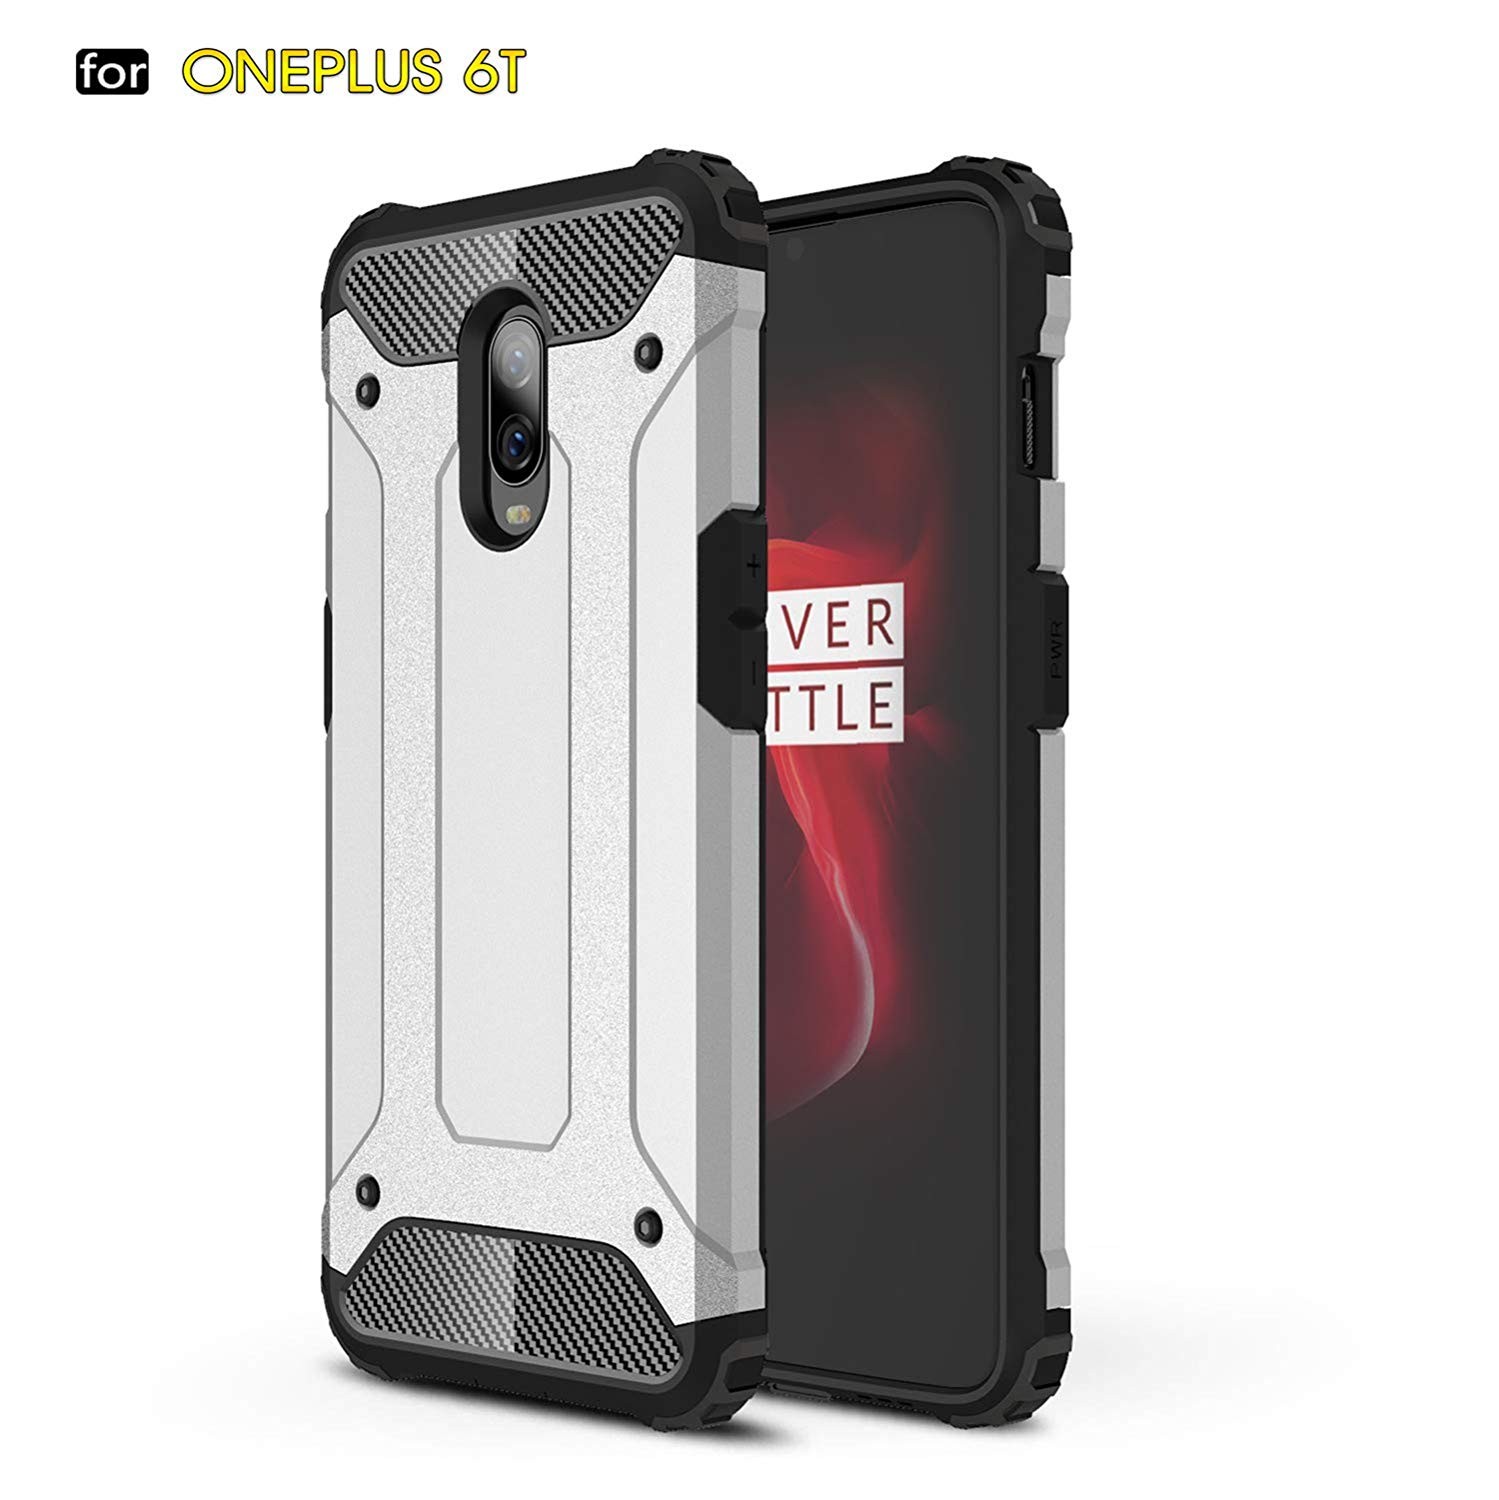 Ultra-Thin Colorful Series Anccer OnePlus 5T Case Anti-Drop Premium Material Slim Full Protection Cover for OnePlus 5T Gravel Black 